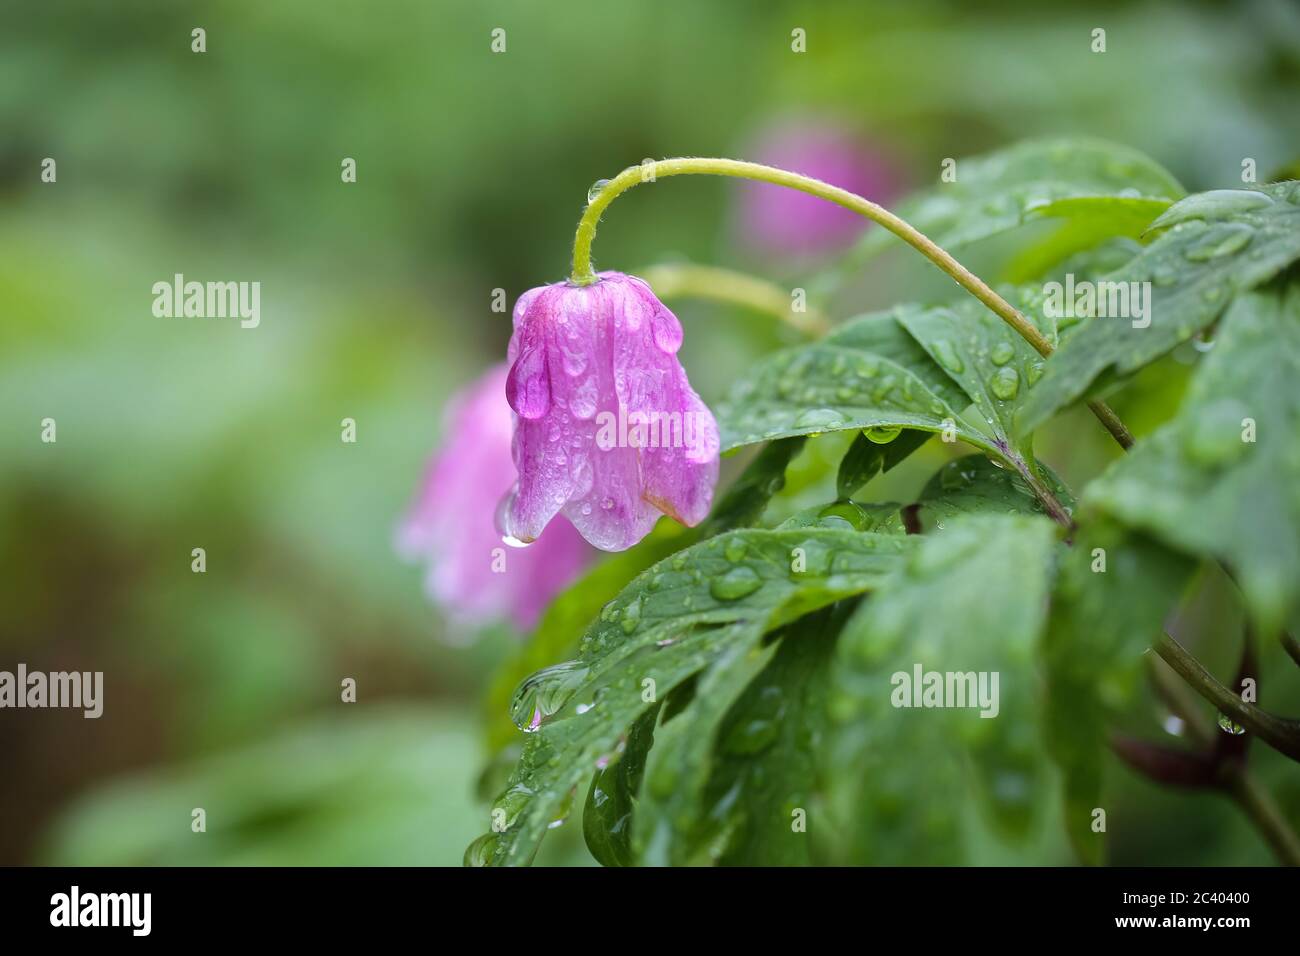 Flower Anemona nemorosa covered with water drops after rain Stock Photo